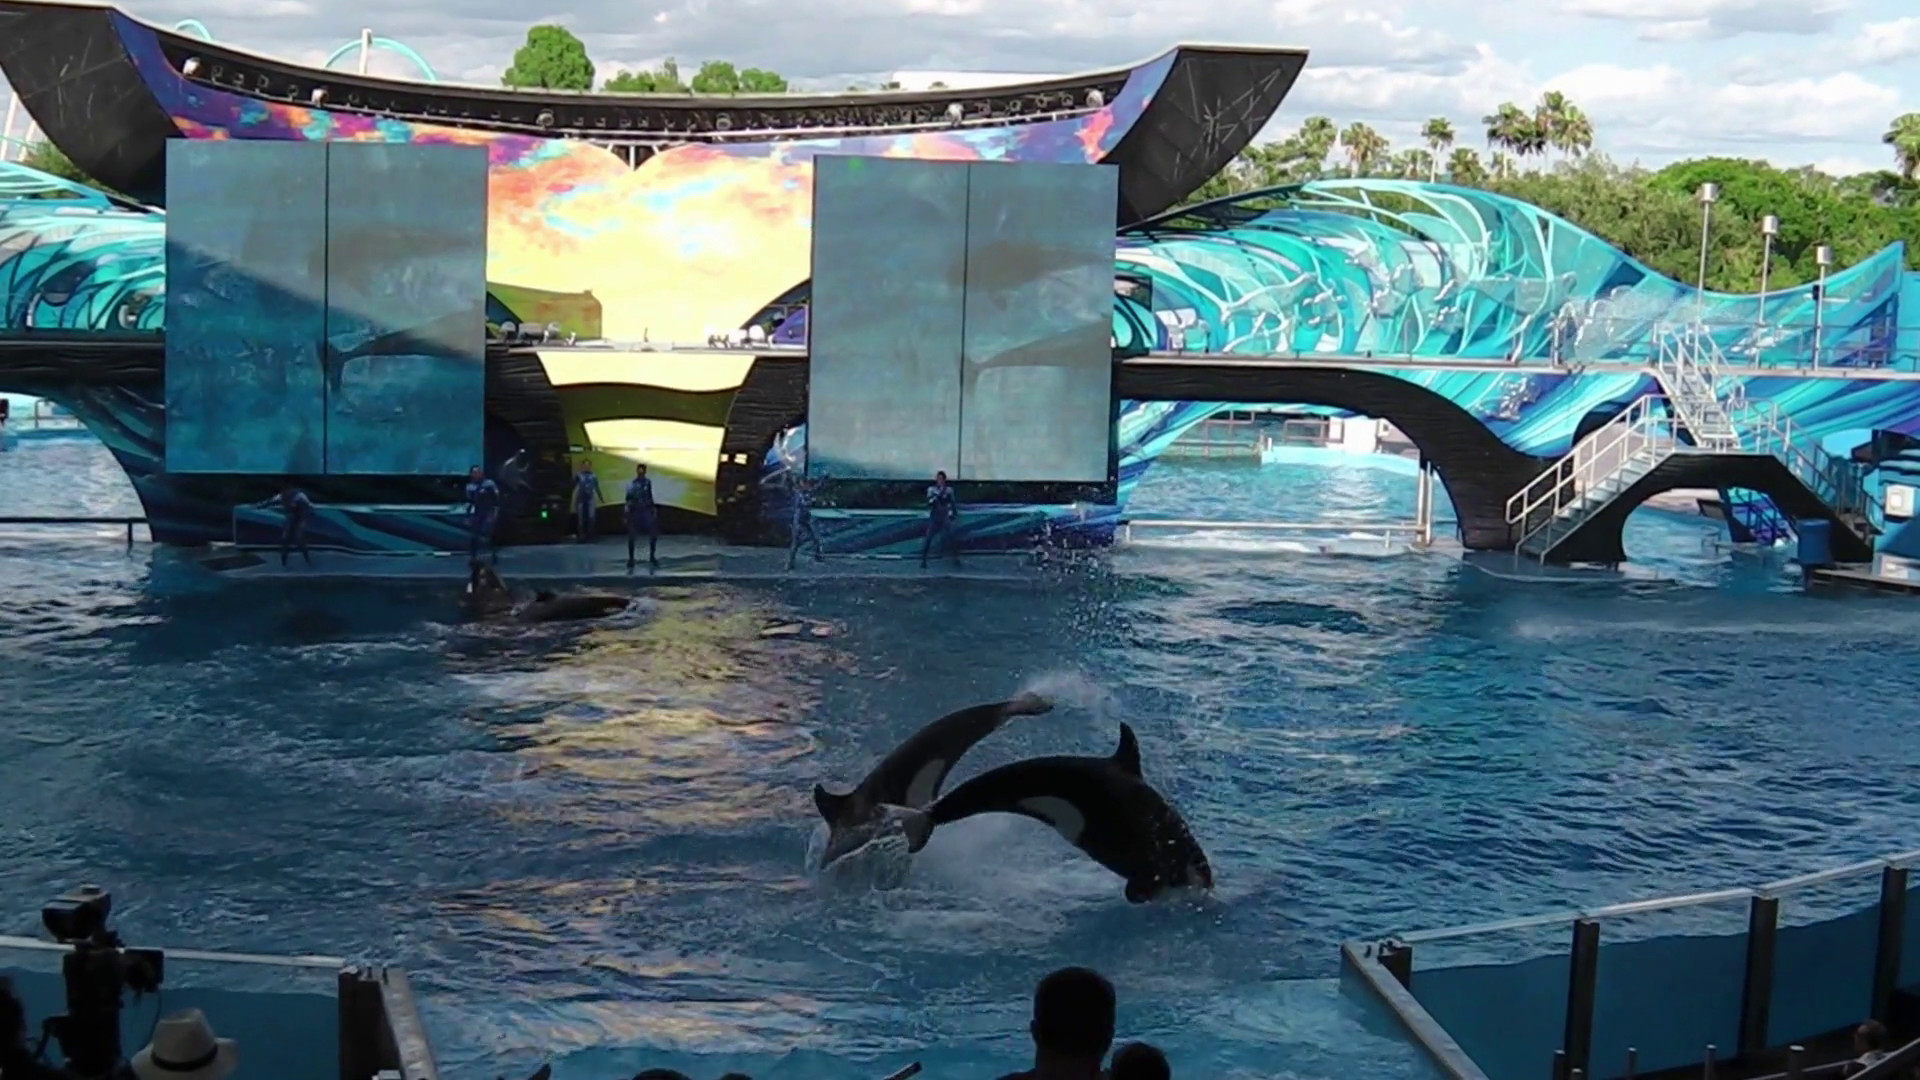 1920x1080 Orlando, Florida, United States - April 22, 2012: Tilikum, the killer  whale, jumping in the shamu show at Seaworld. Tilikum is the largest and  most famous ...